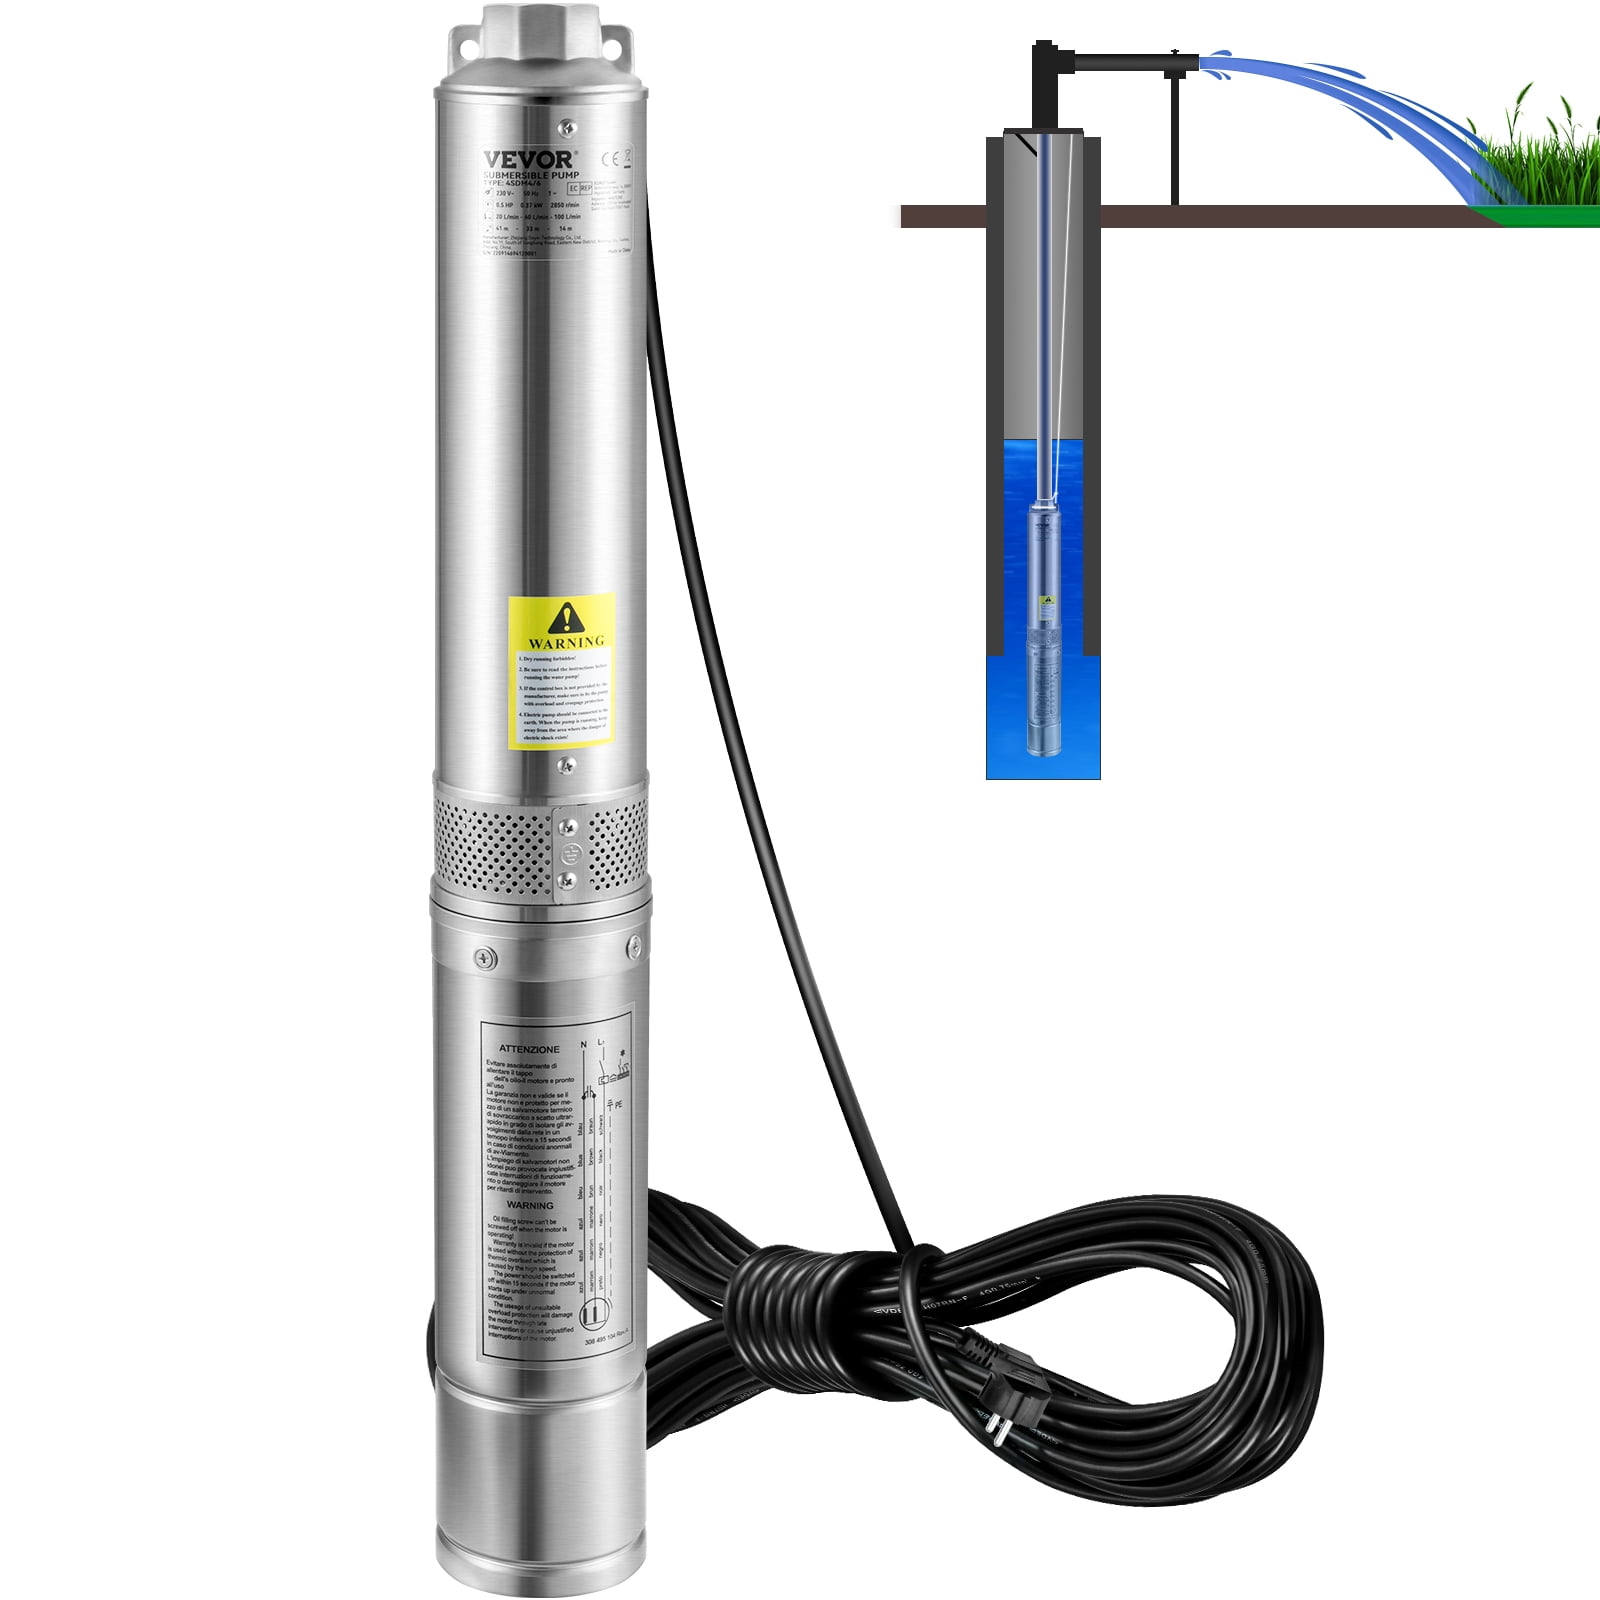 VEVOR Deep Well Submersible Pump, 2HP/1500W 230V/60Hz, 37GPM Flow 427 ft  Head, with 33 ft Electric Cord, inch Stainless Steel Water Pumps for  Industrial, Irrigation  Home Use, IP68 Waterproof Grade